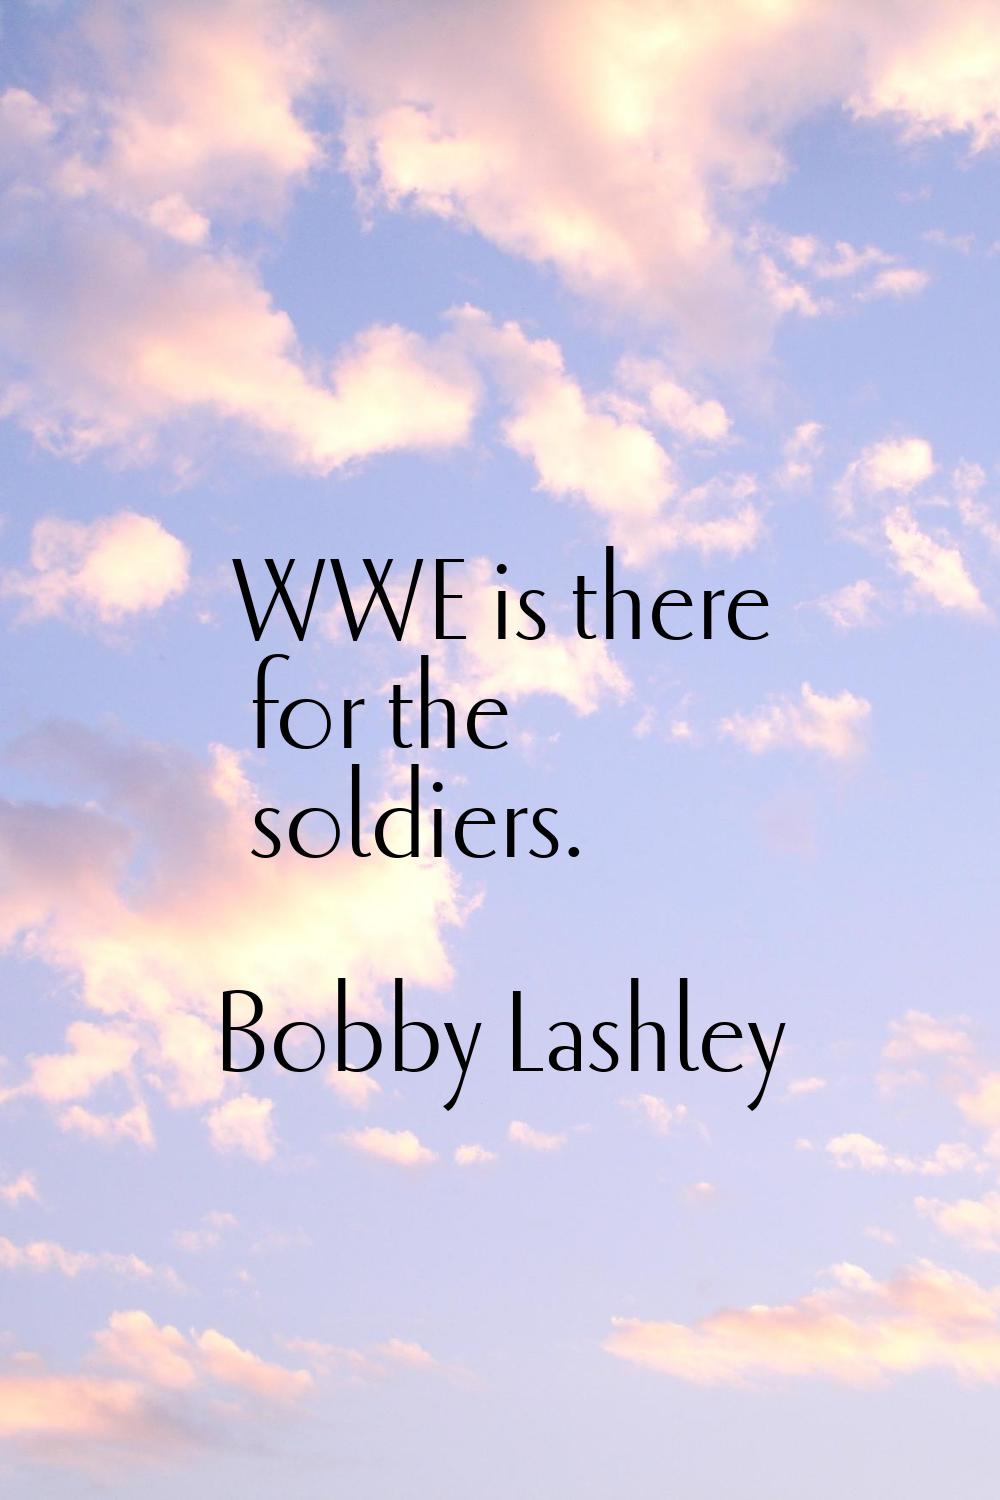 WWE is there for the soldiers.